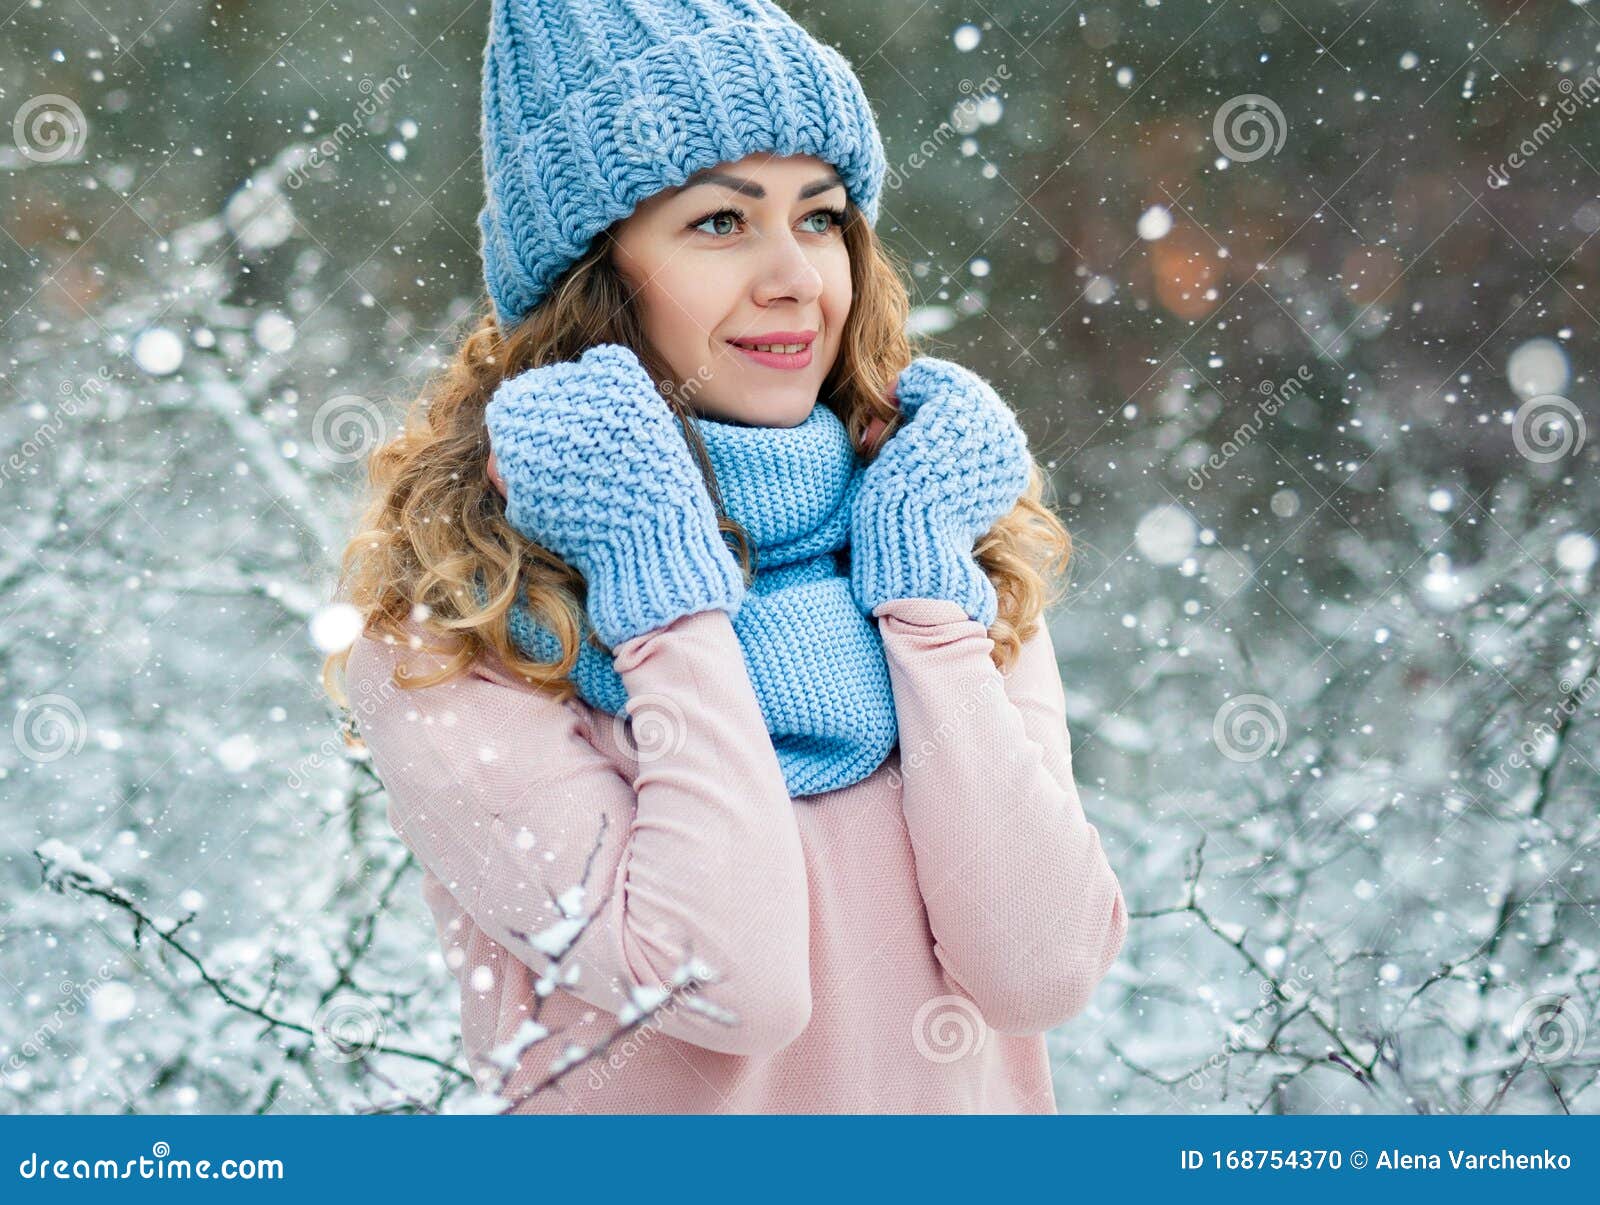 Young Woman Enjoy a Snow World in Outdoors Stock Photo - Image of ...